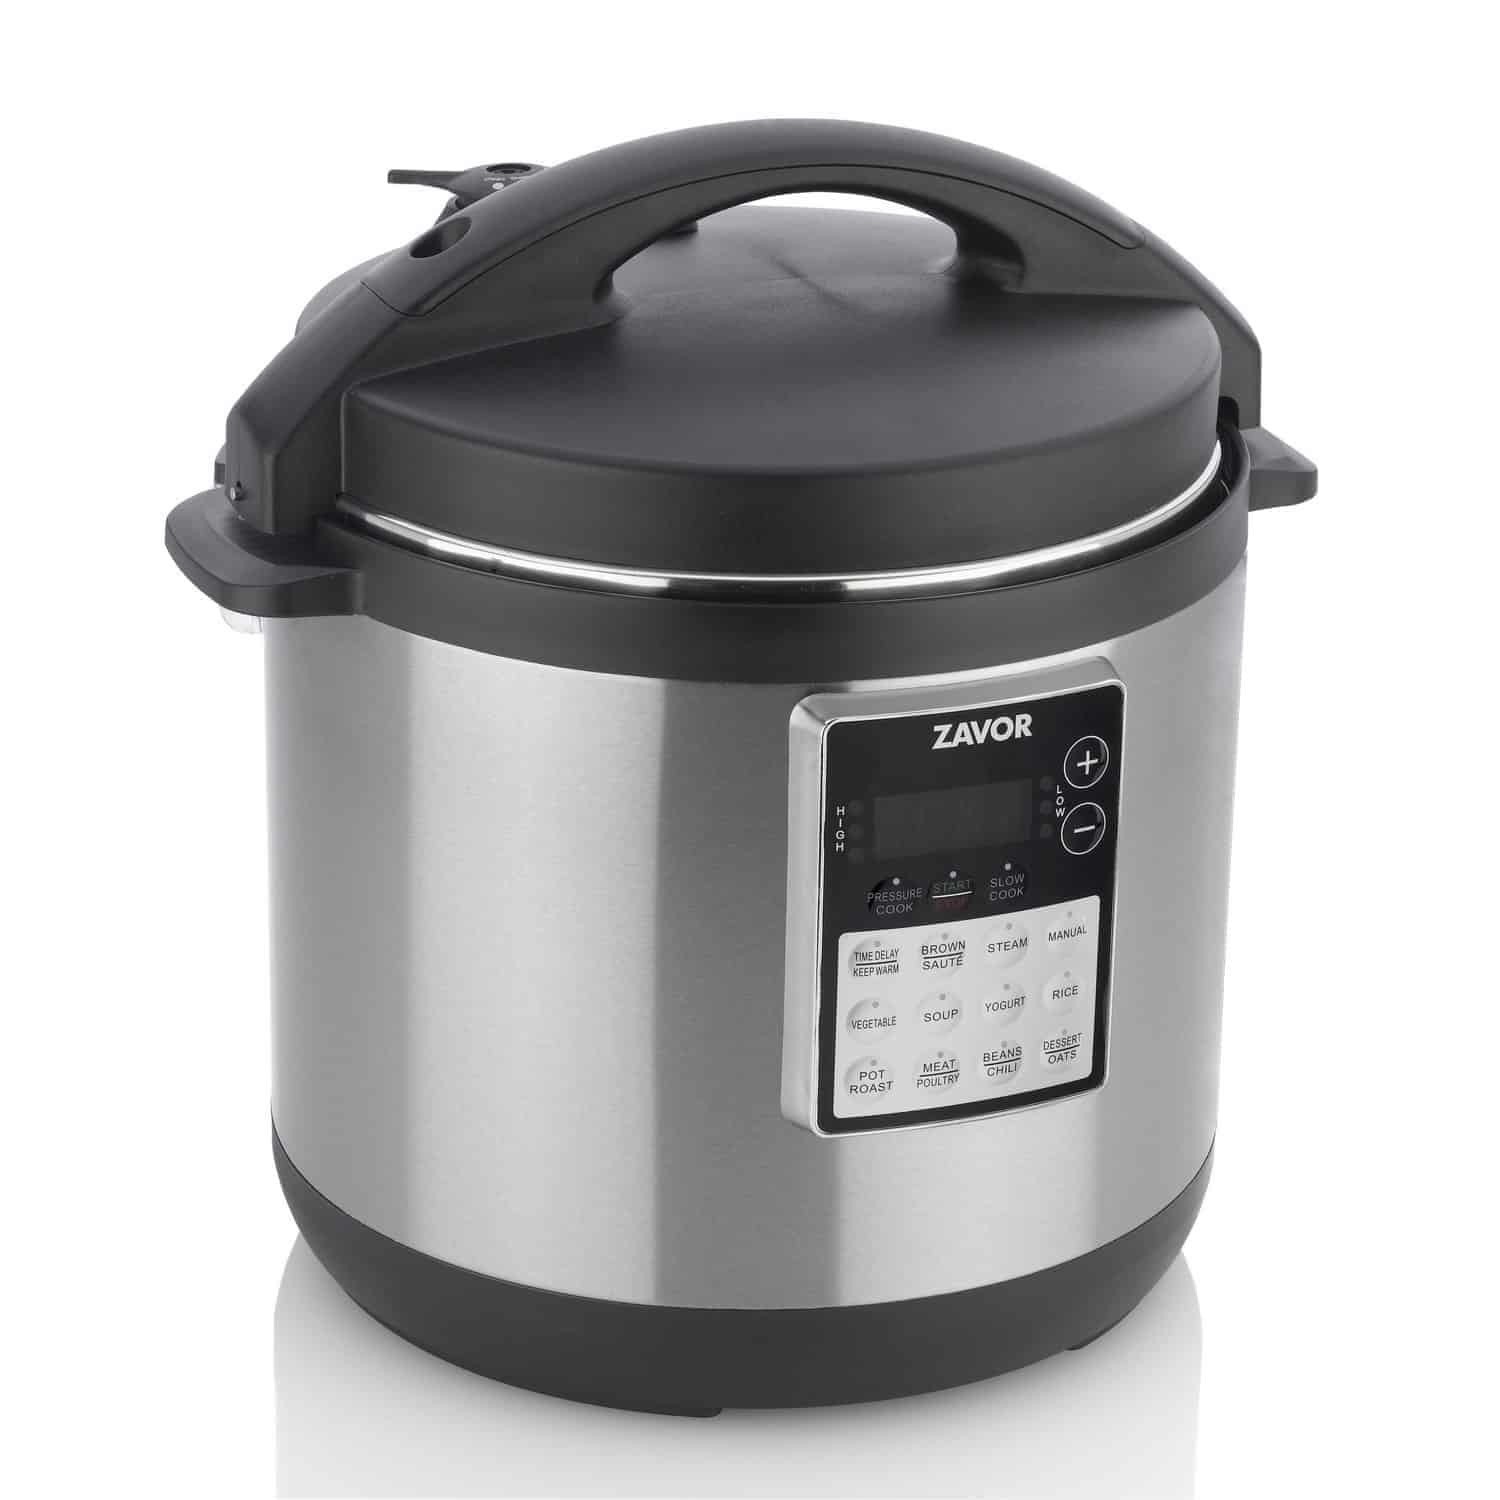 Zavor LUX Edge, 4 Quart Programmable Electric Multi-Cooker: Pressure  Cooker, Slow Cooker, Rice Cooker, Yogurt Maker, Steamer and more -  Stainless